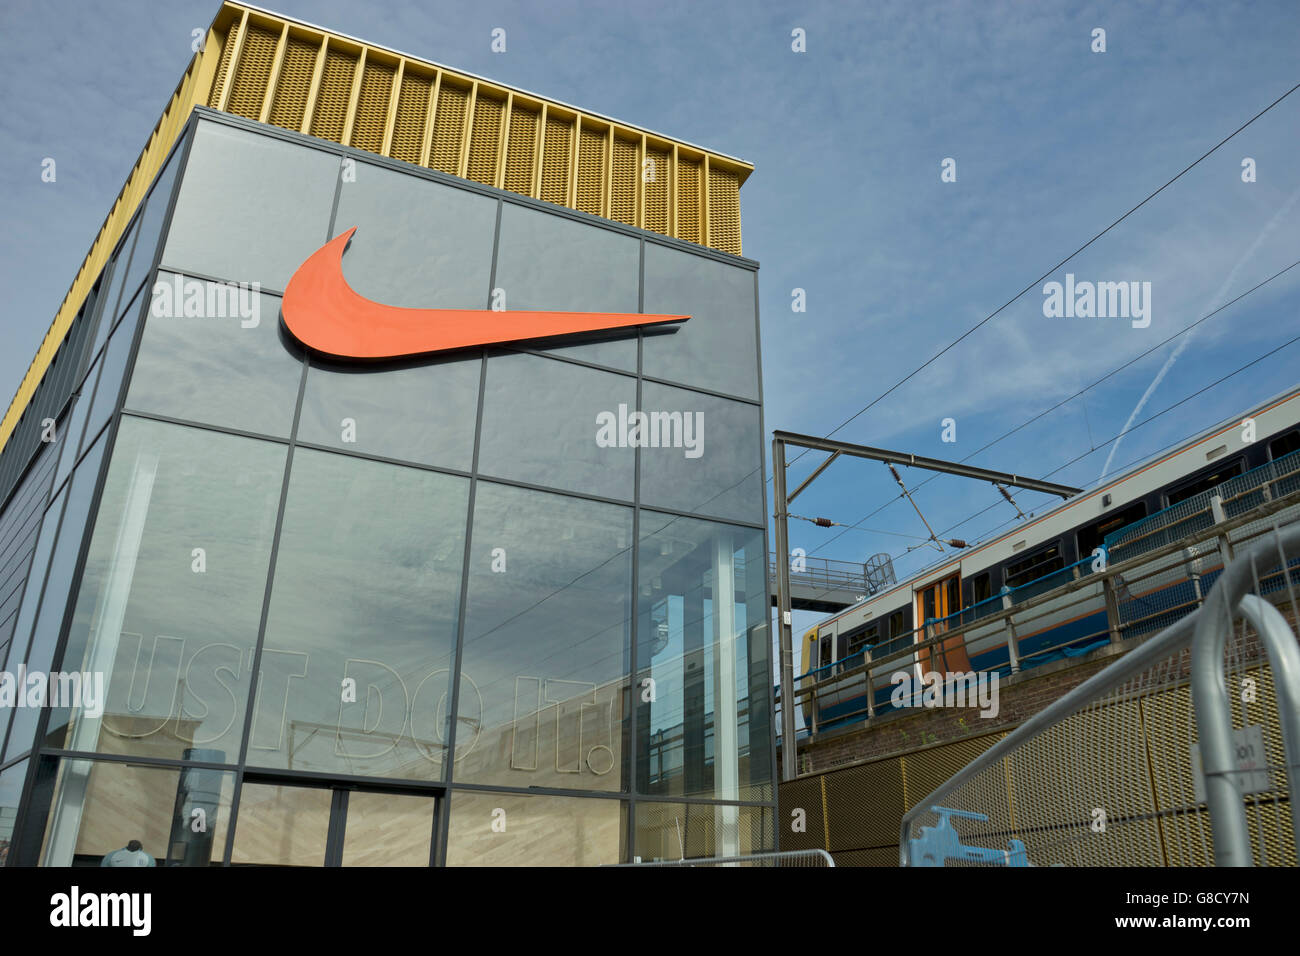 outlet nike london